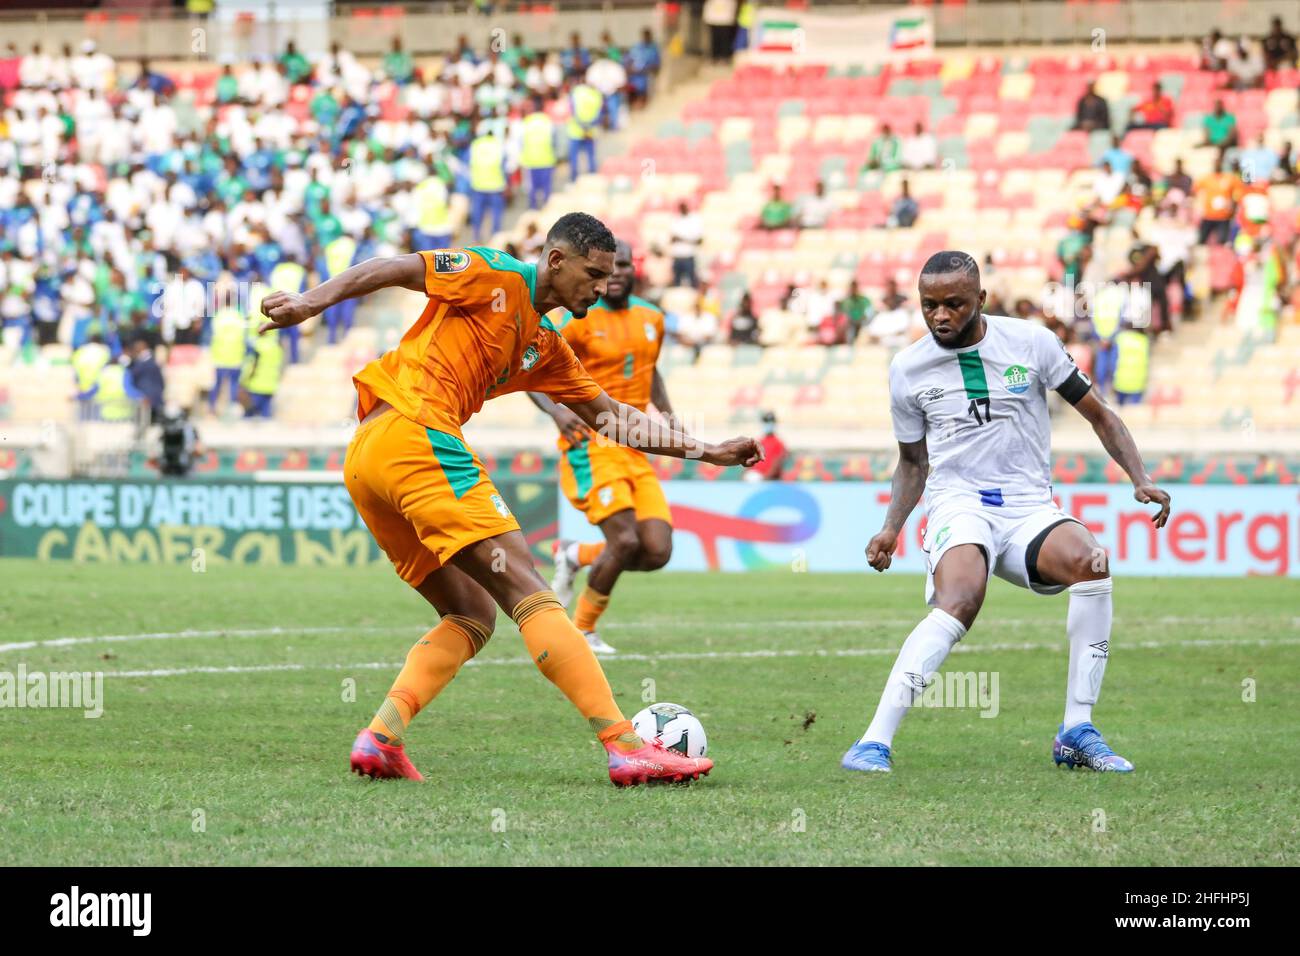 Douala, CAMEROON - JANUARY 16: Sebastien Haller of Ivory Coast during the Africa Cup of Nations group E match between Ivory Coast and Sierra Leone at Stade de Japoma on January 16 2022 in Douala, Cameroon. (Photo by SF) Credit: Sebo47/Alamy Live News Stock Photo